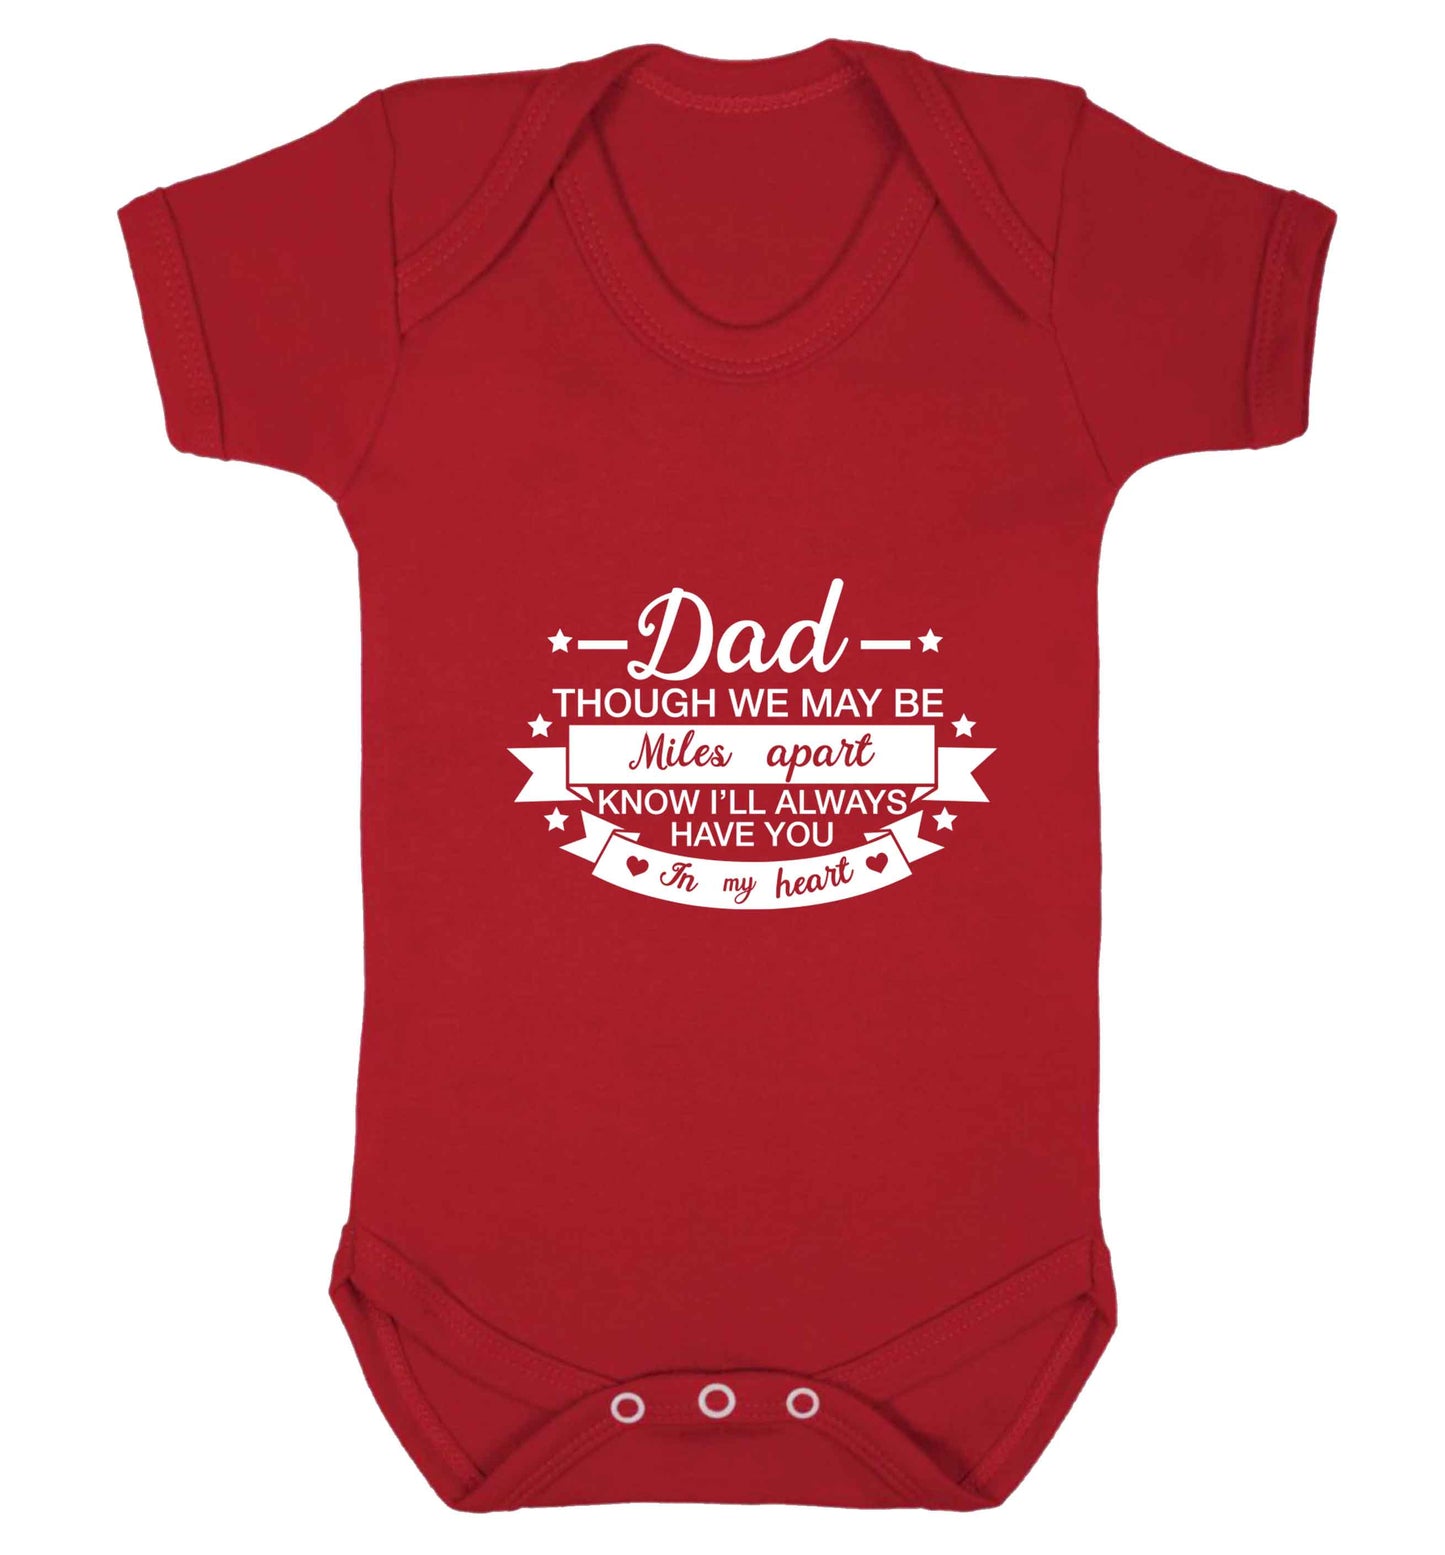 Dad though we are miles apart know I'll always have you in my heart baby vest red 18-24 months